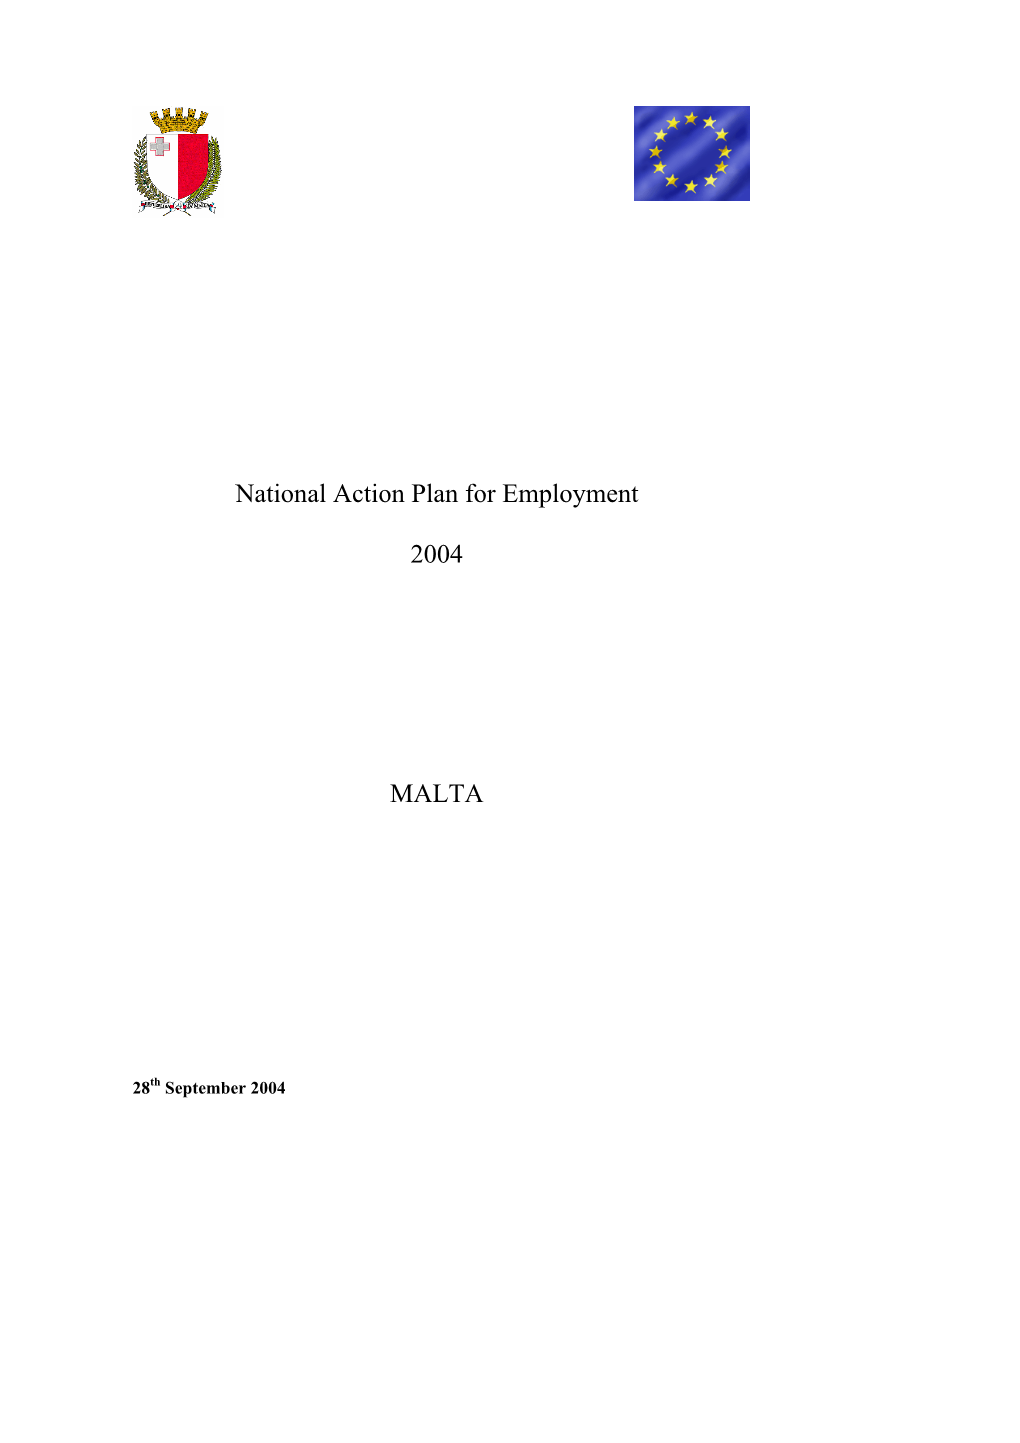 National Action Plan for Employment 2004 MALTA